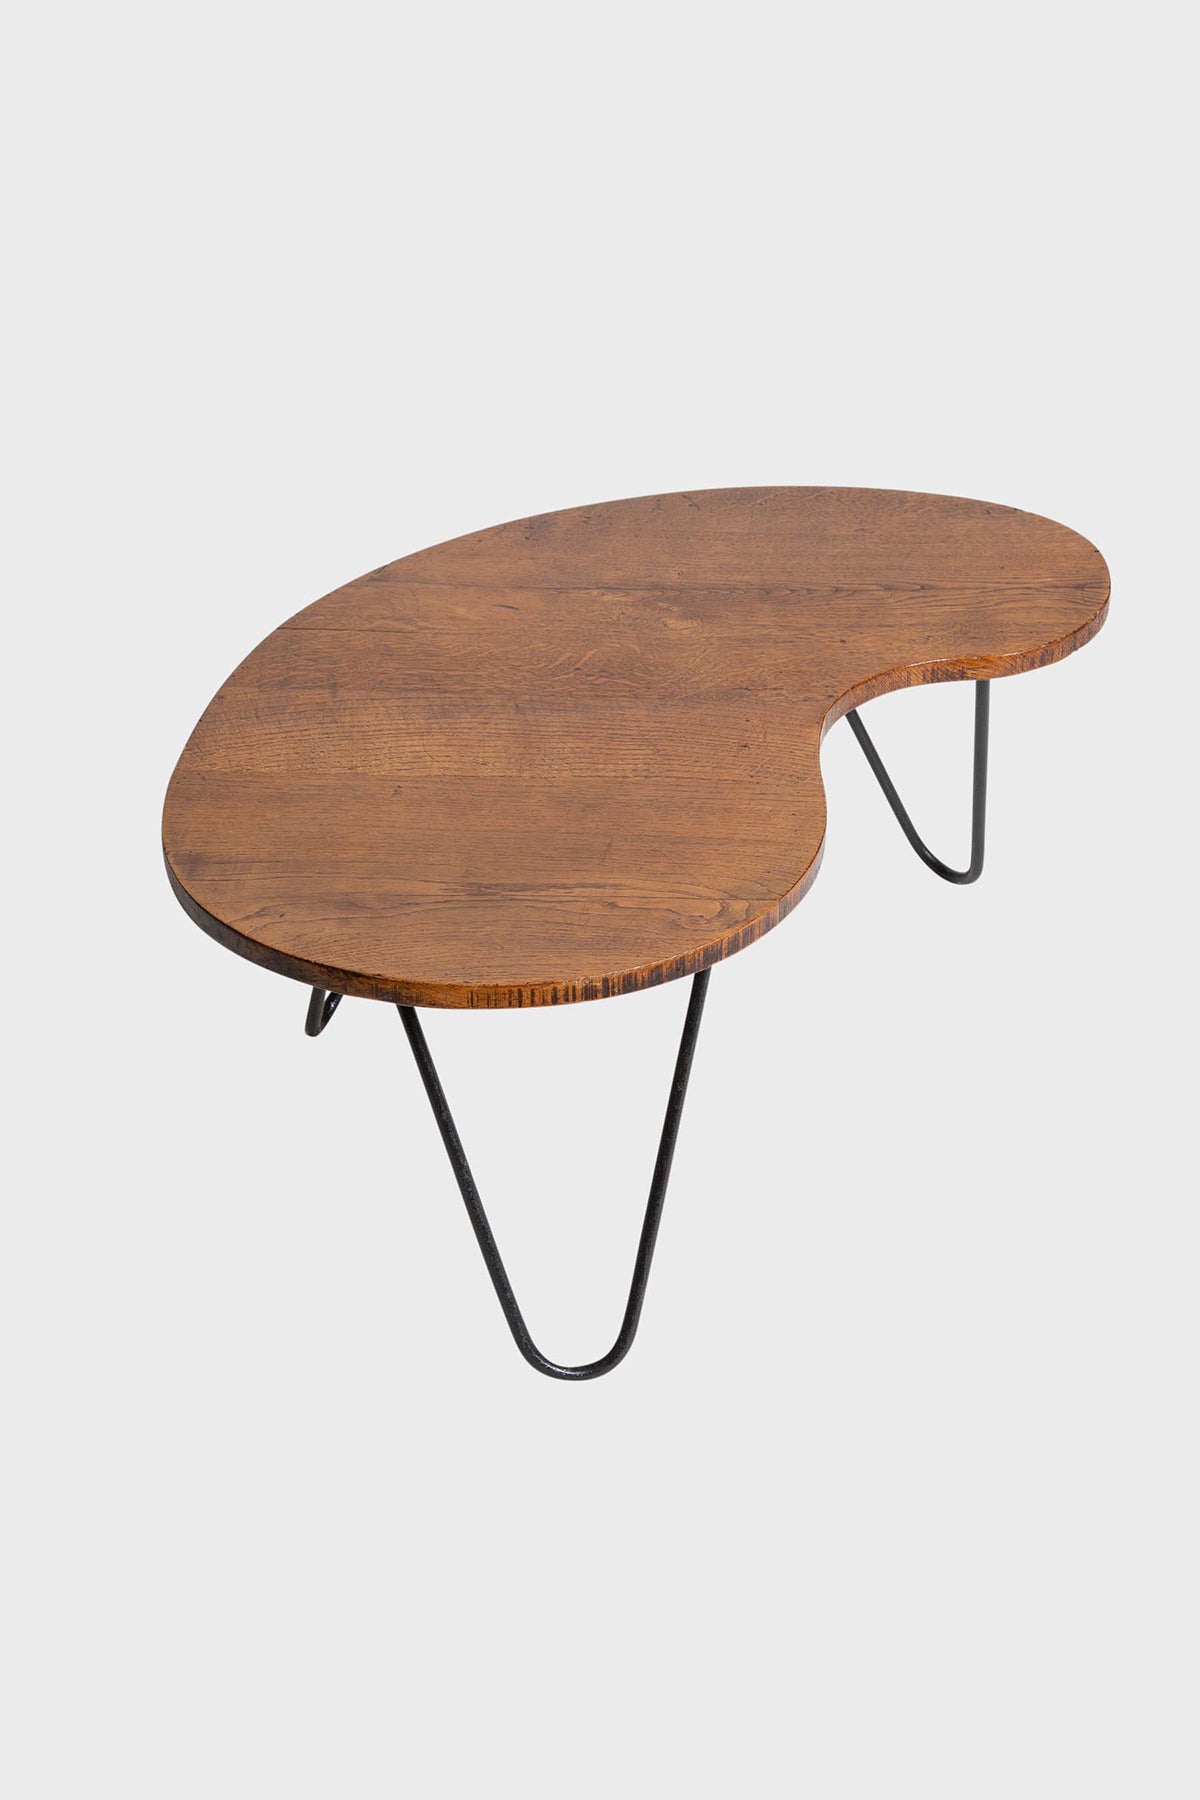 MAXFIELD PRIVATE COLLECTION | 1950'S JACQUES HITIER LOW TABLE